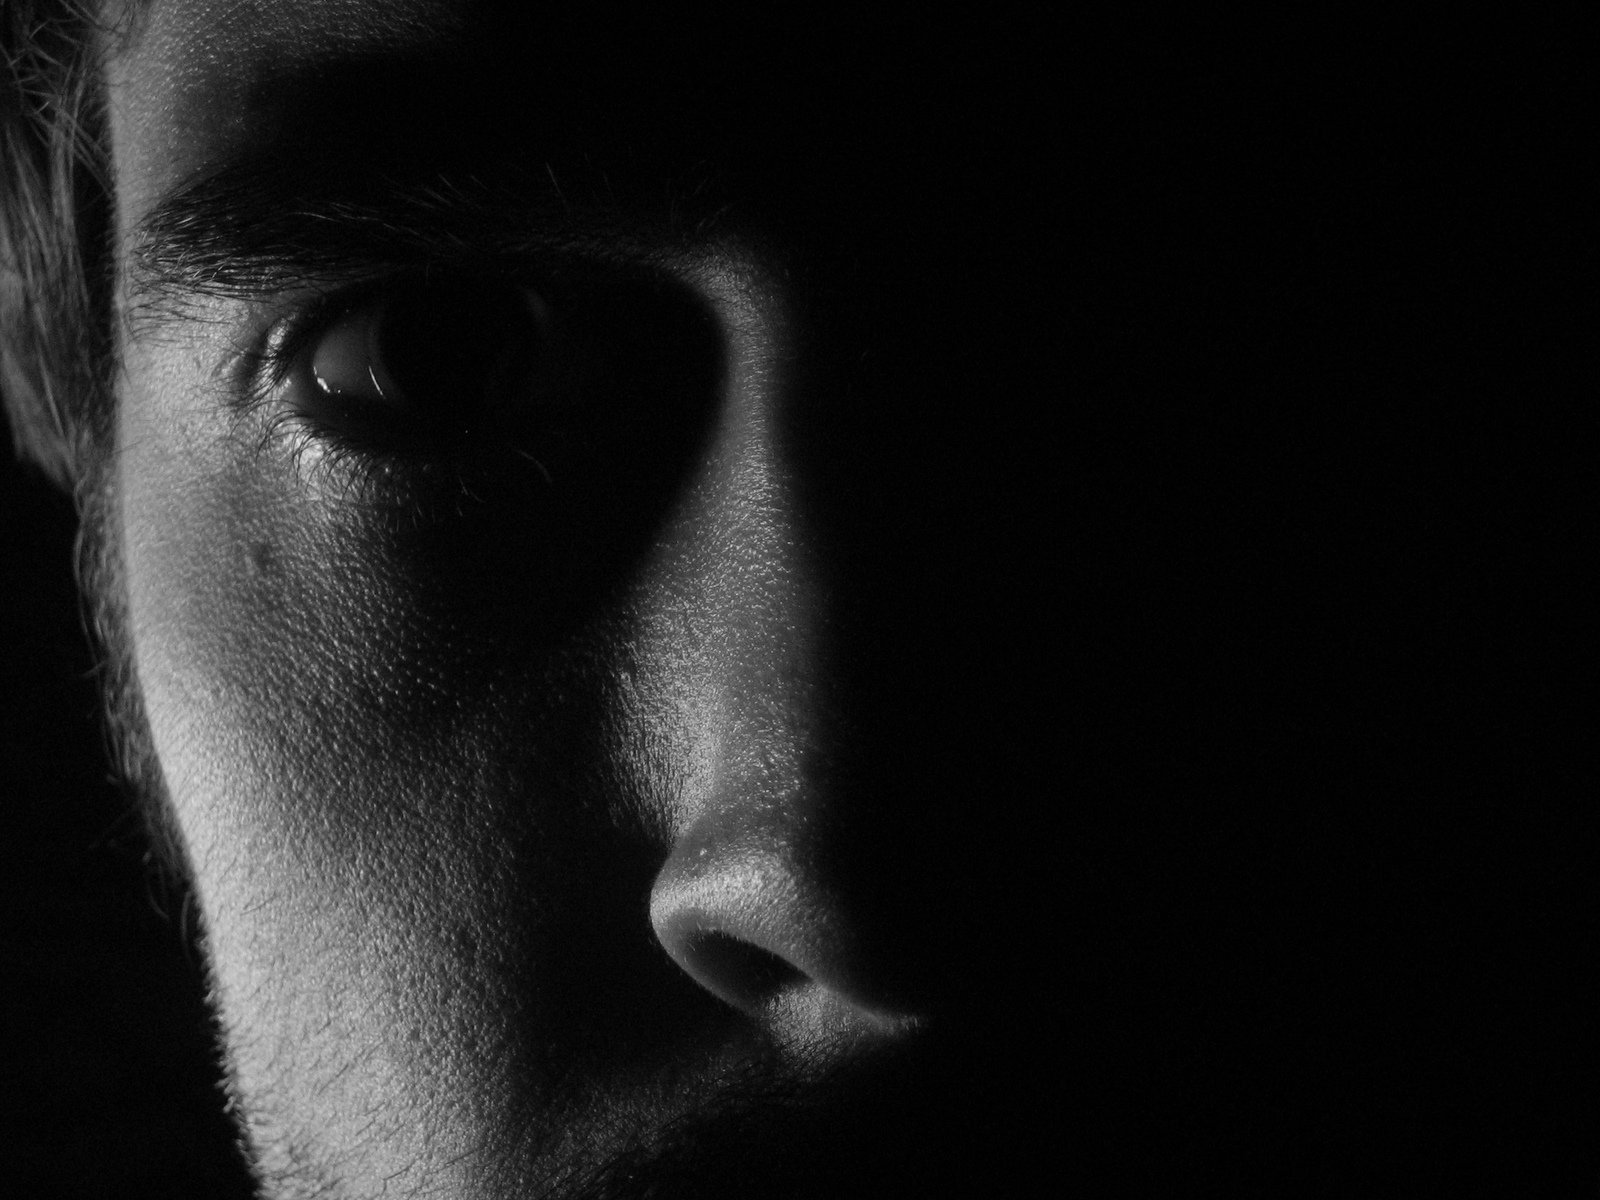 black and white pograph of man's face with left eye partially obscured by dark background